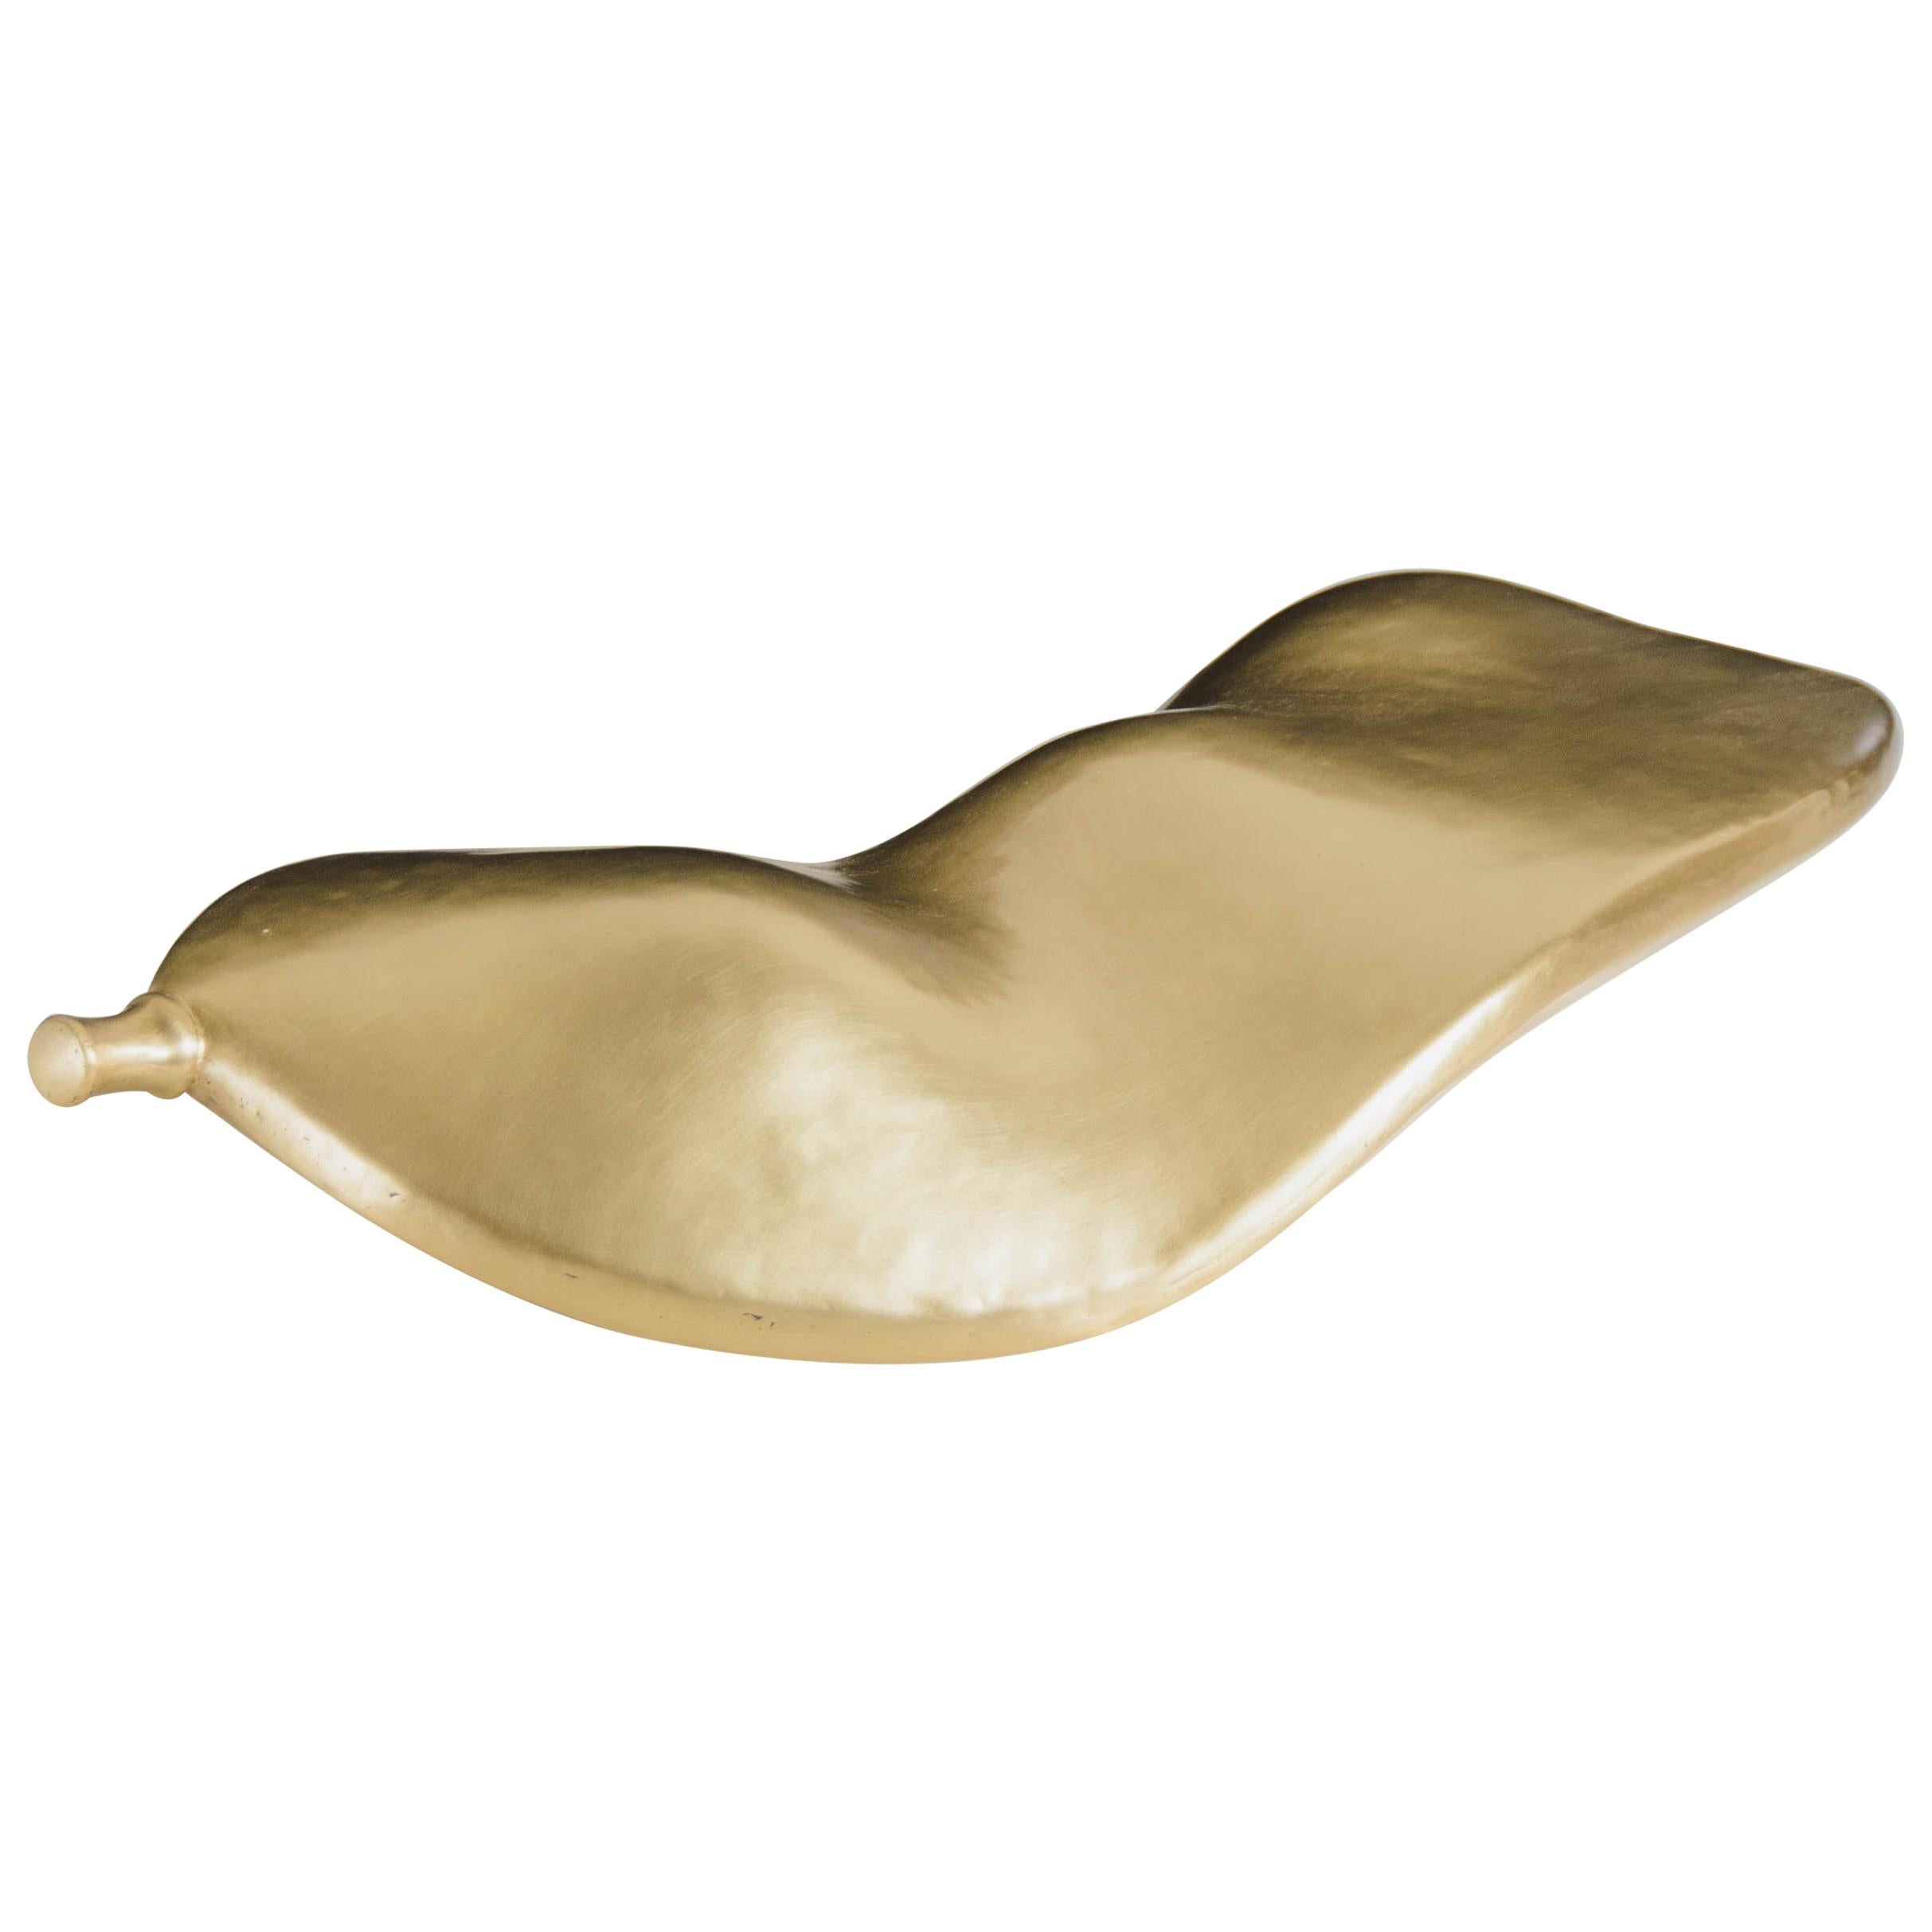 Contemporary Lima Bean Sculpture in Brass by Robert Kuo, Hand Repoussé, Limited For Sale